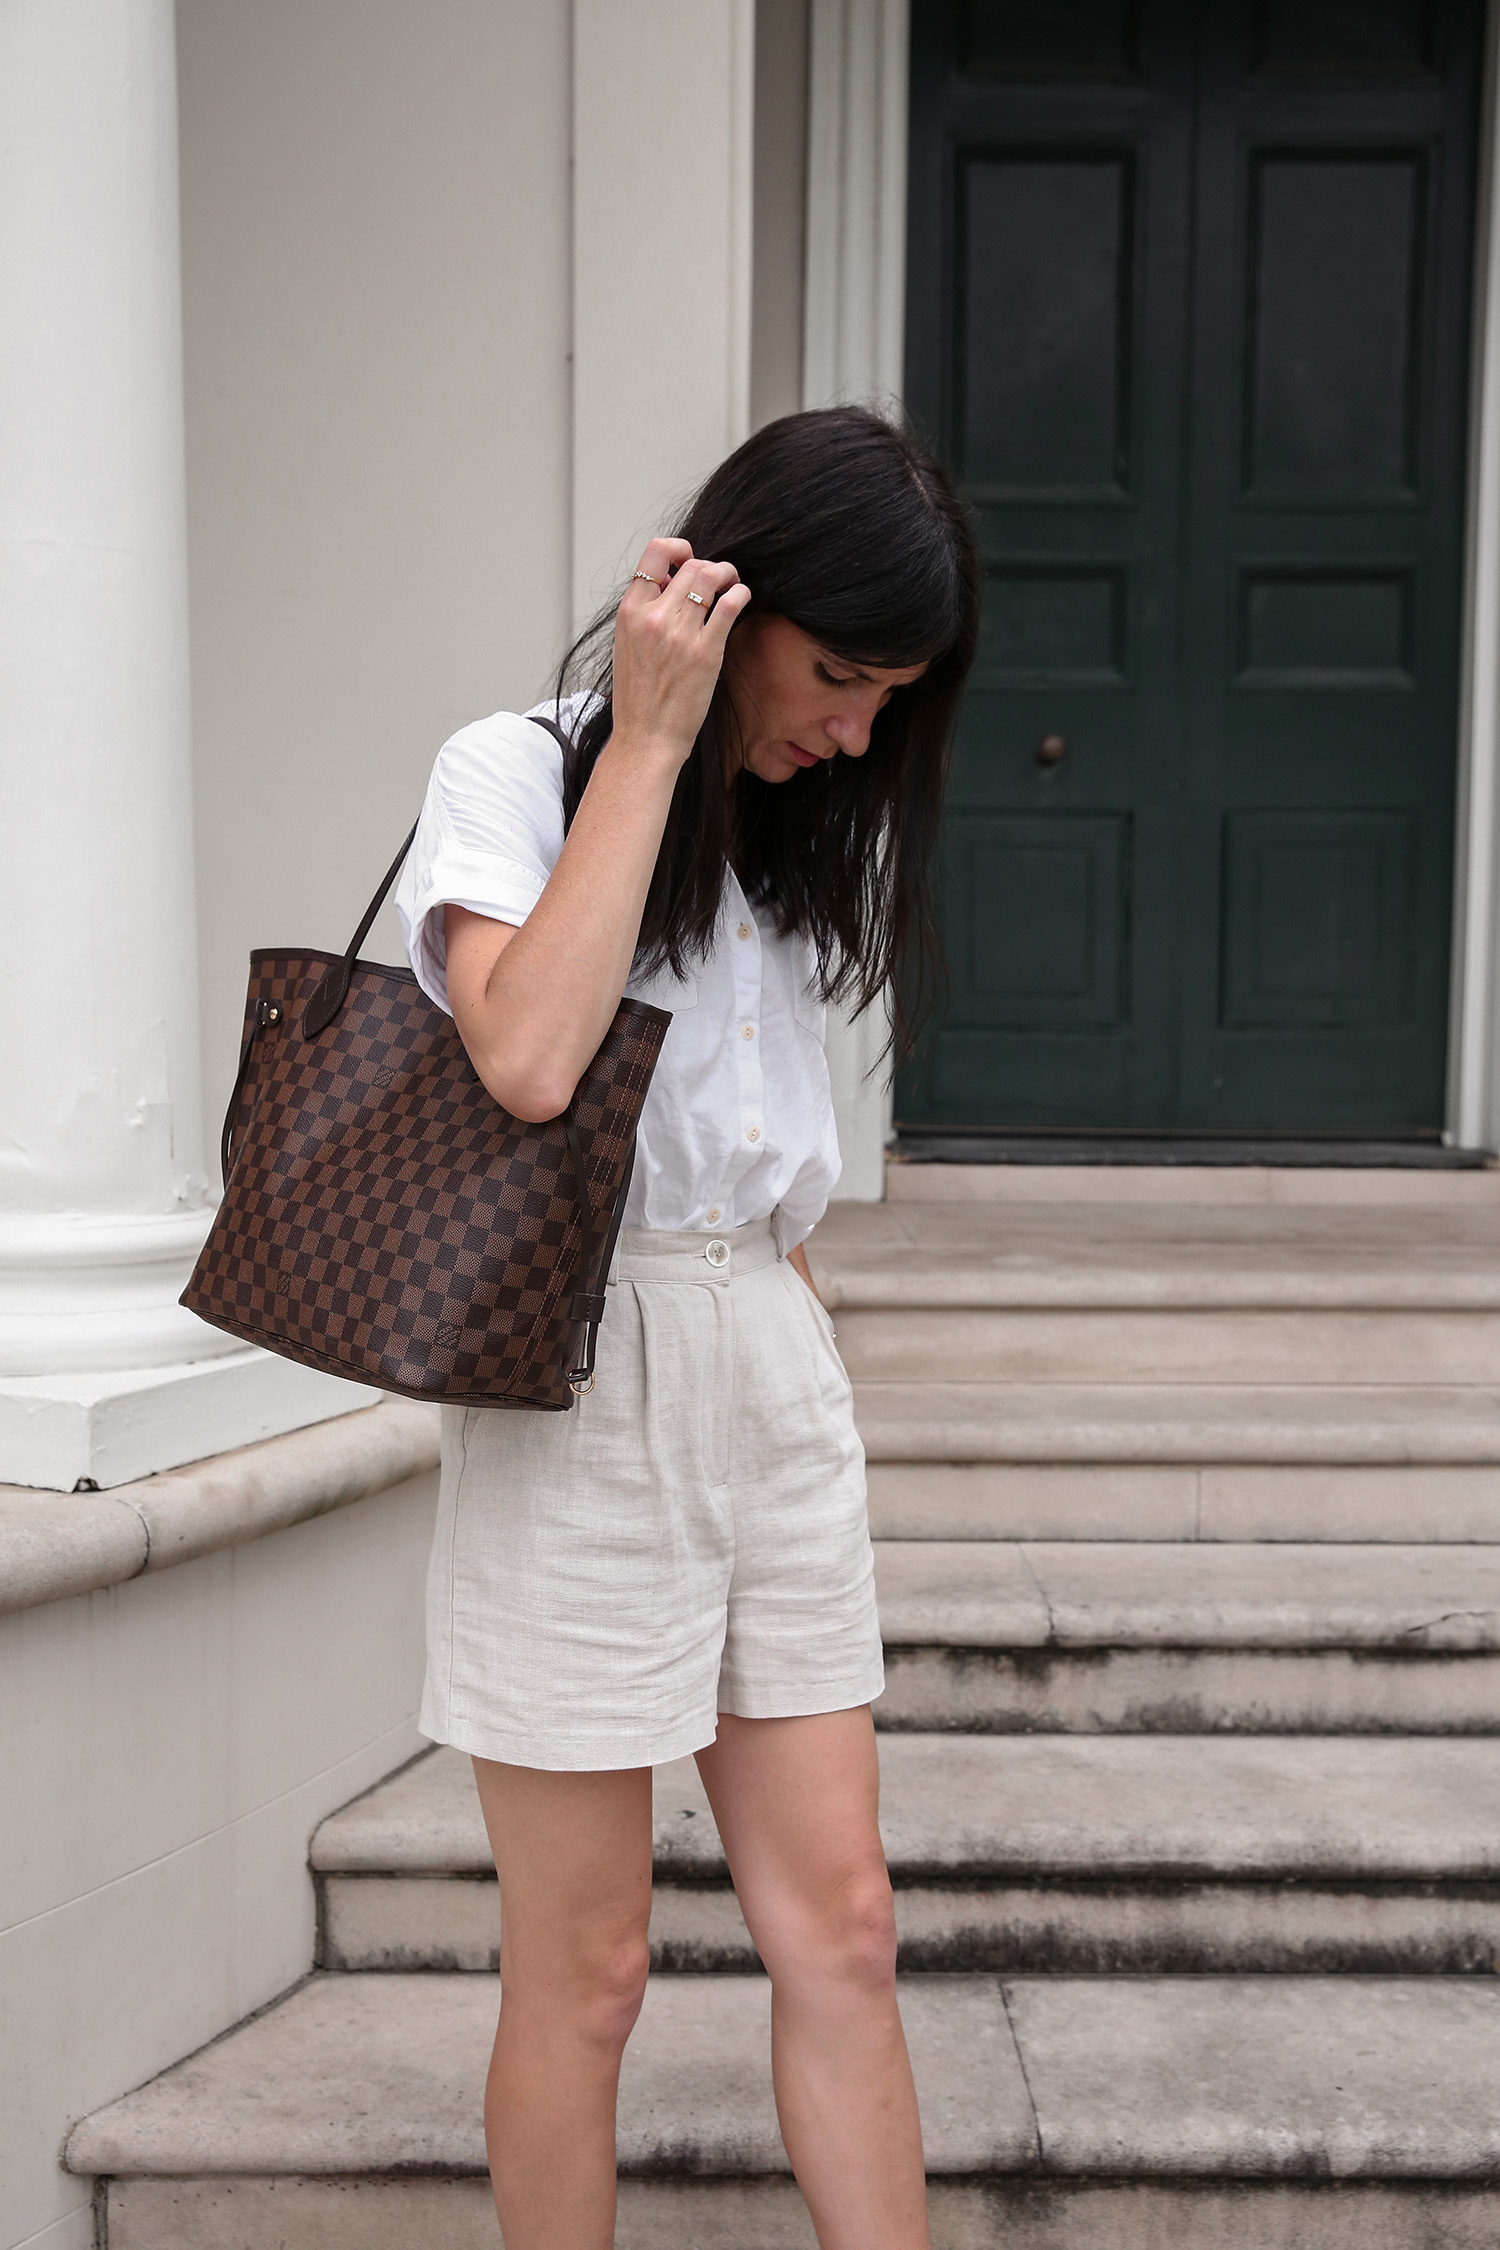 Repeating a summer outfit fave - Mademoiselle